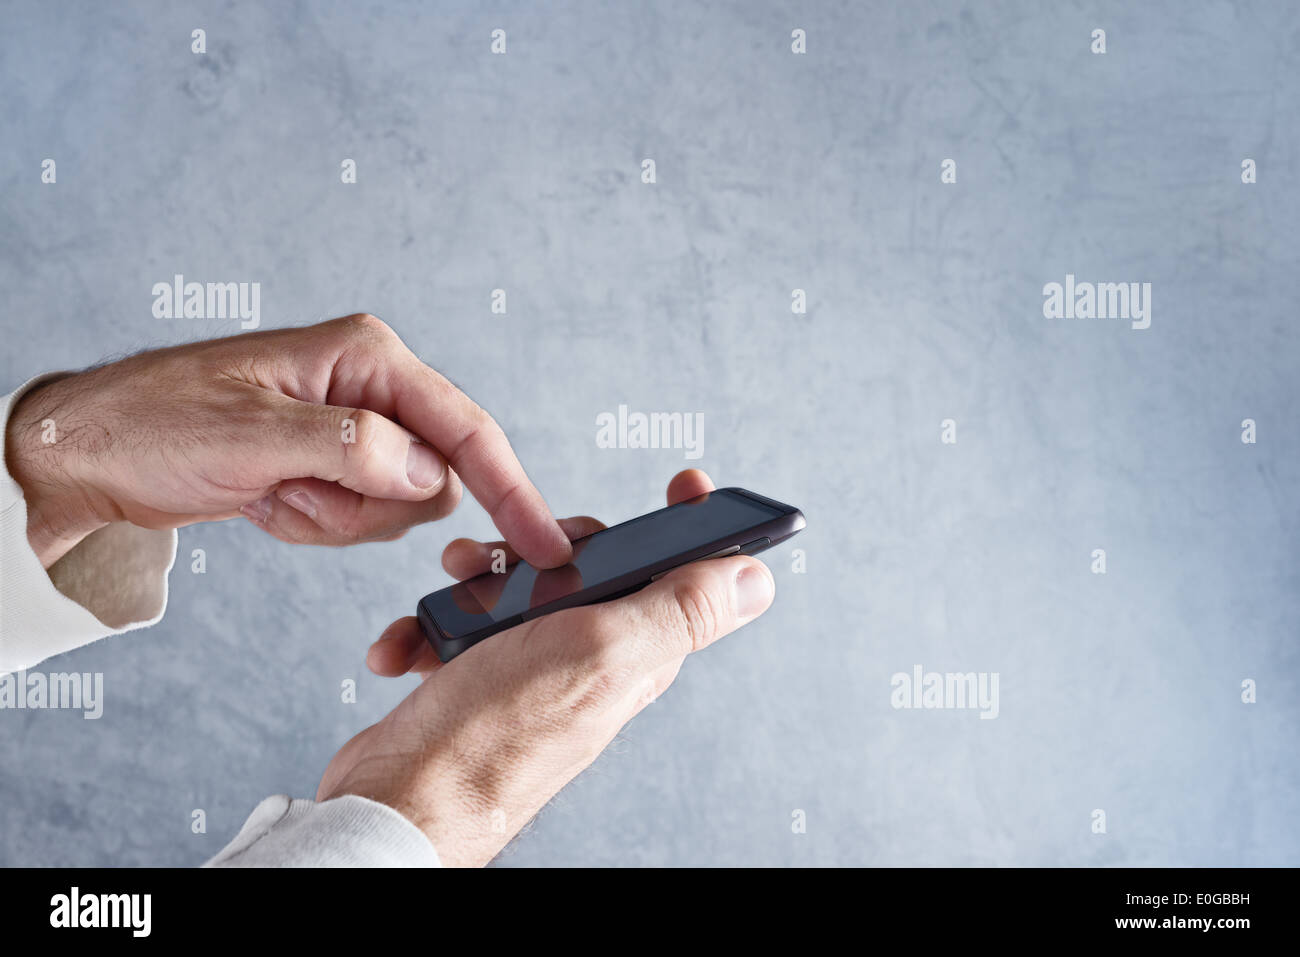 Hands holding mobile smart phone with touch screen. Stock Photo